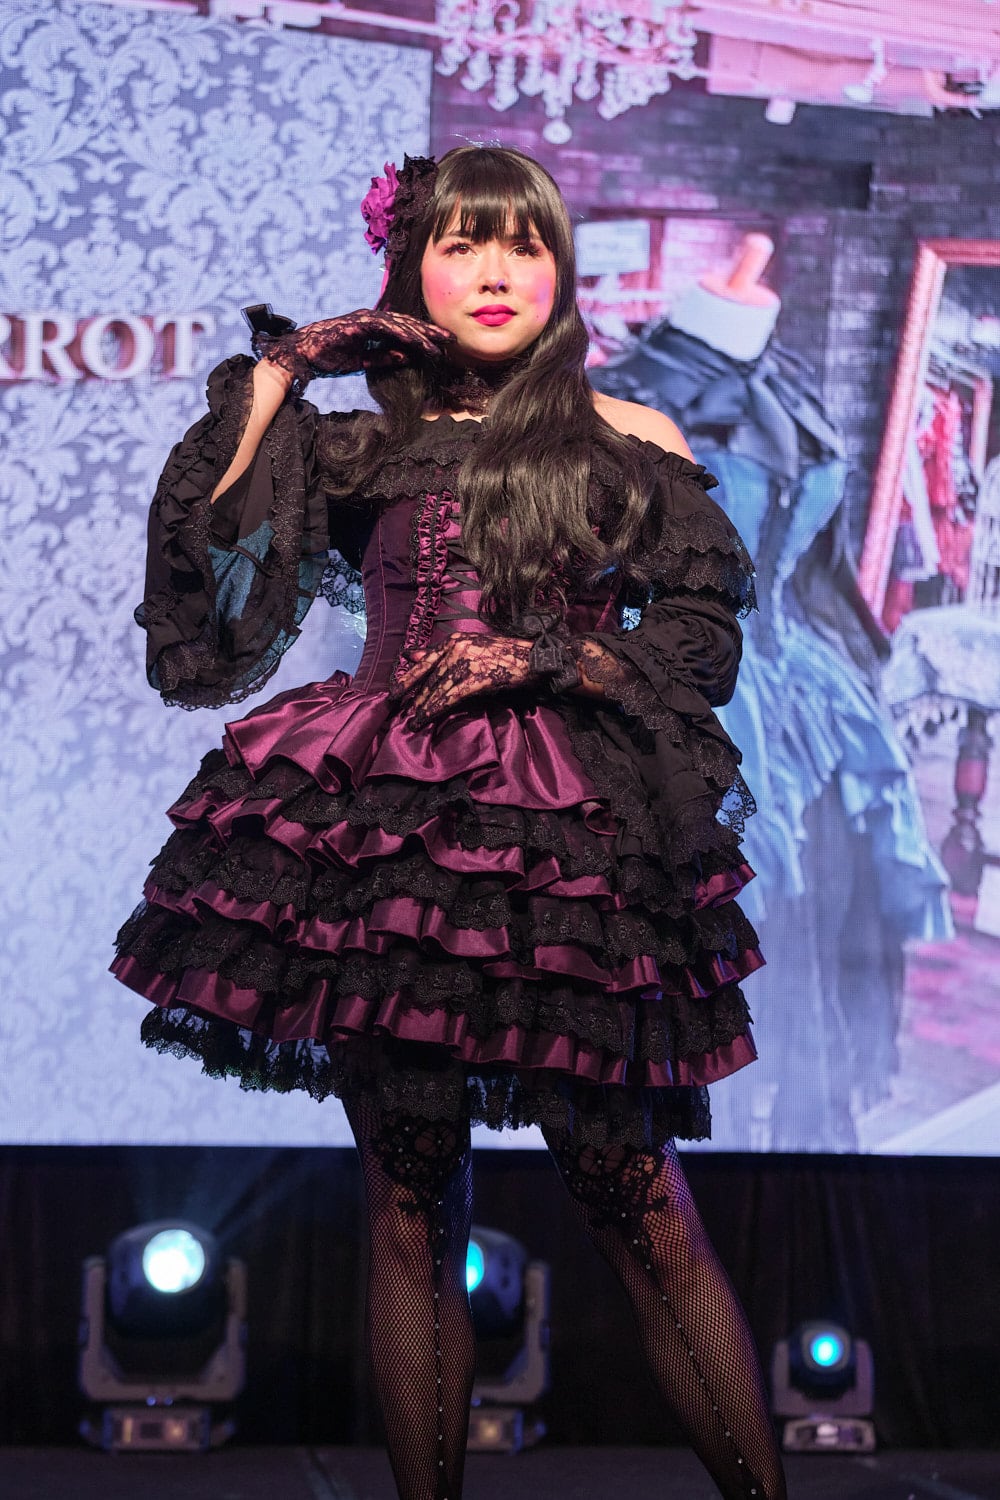 Purple and black gothic lolita outfit - closeup 1.